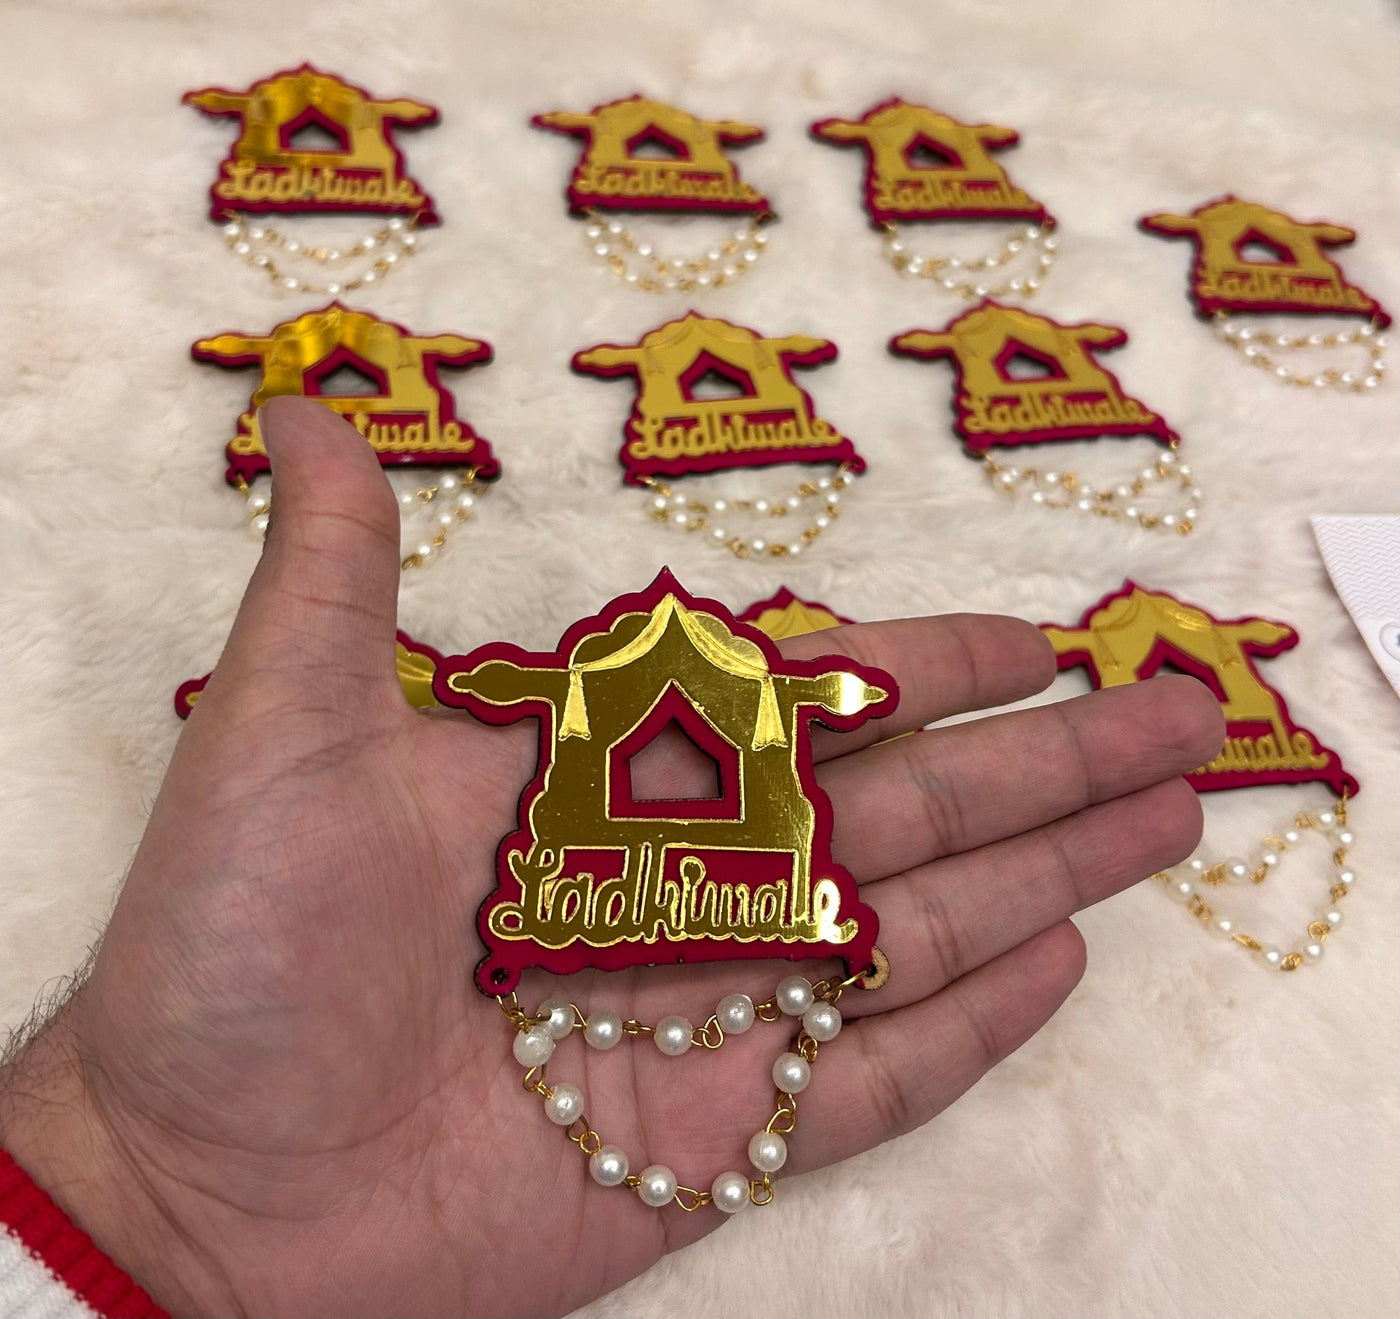 30 RS EACH ON BUYING 🏷150+ PCS | CALL 📞 AT 8619550223 Broaches LAMANSH® LADKIWALE Brooches for Barati swagat in wedding / Brooches for bride side guests / Quirky Brooches for Guests in Shaadi🎉